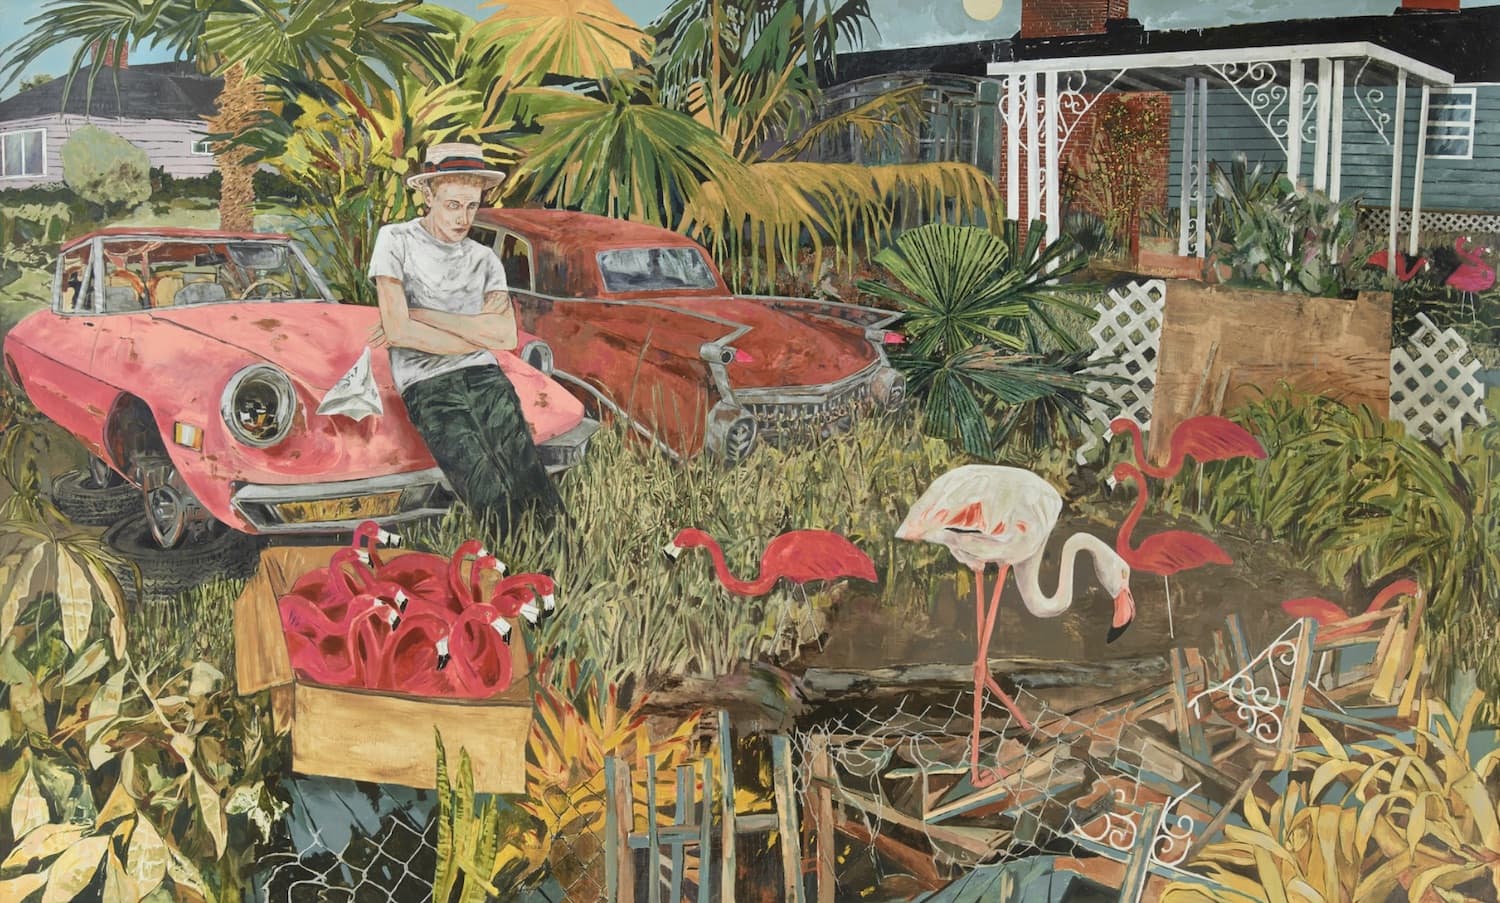 Painting: An overgrown garden with discarded waste, flamingo garden sculptures and two run-down Cadillacs, one of which has a young male leaning cross-armed against.